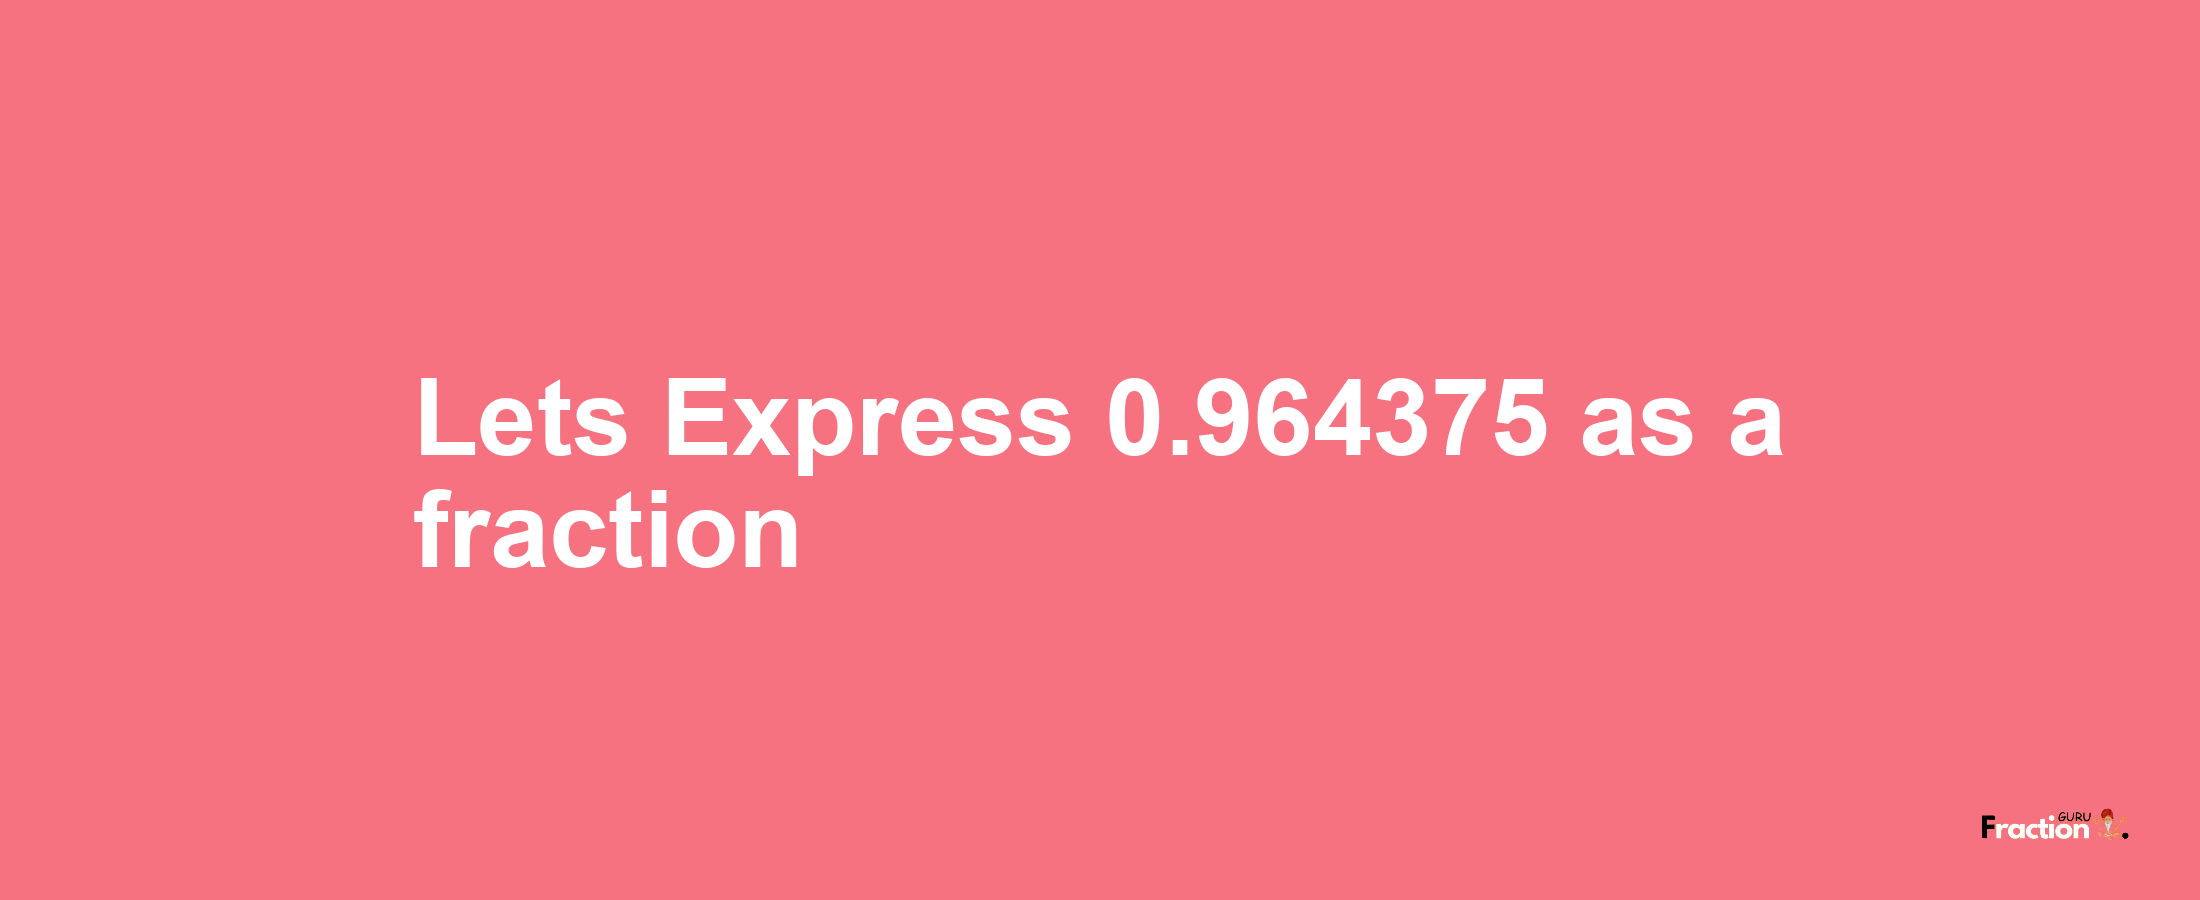 Lets Express 0.964375 as afraction